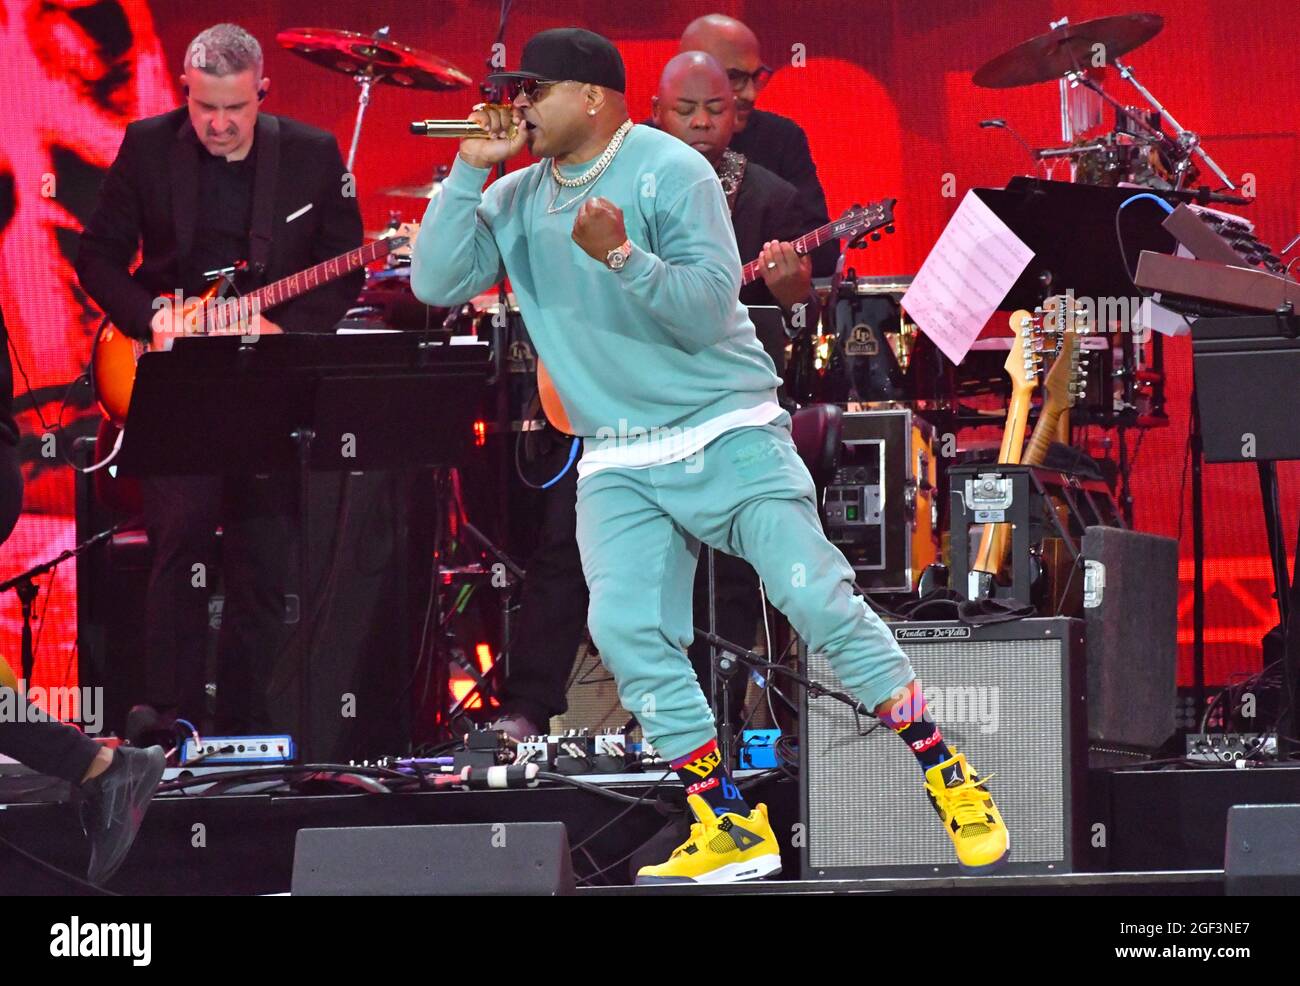 NEW YORK, NEW YORK - AUGUST 21: LL Cool J performs onstage during We Love NYC: The Homecoming Concert Produced by NYC, Clive Davis, and Live Nation on August 21, 2021 in New York City. (Photo by John Atashian) Stock Photo